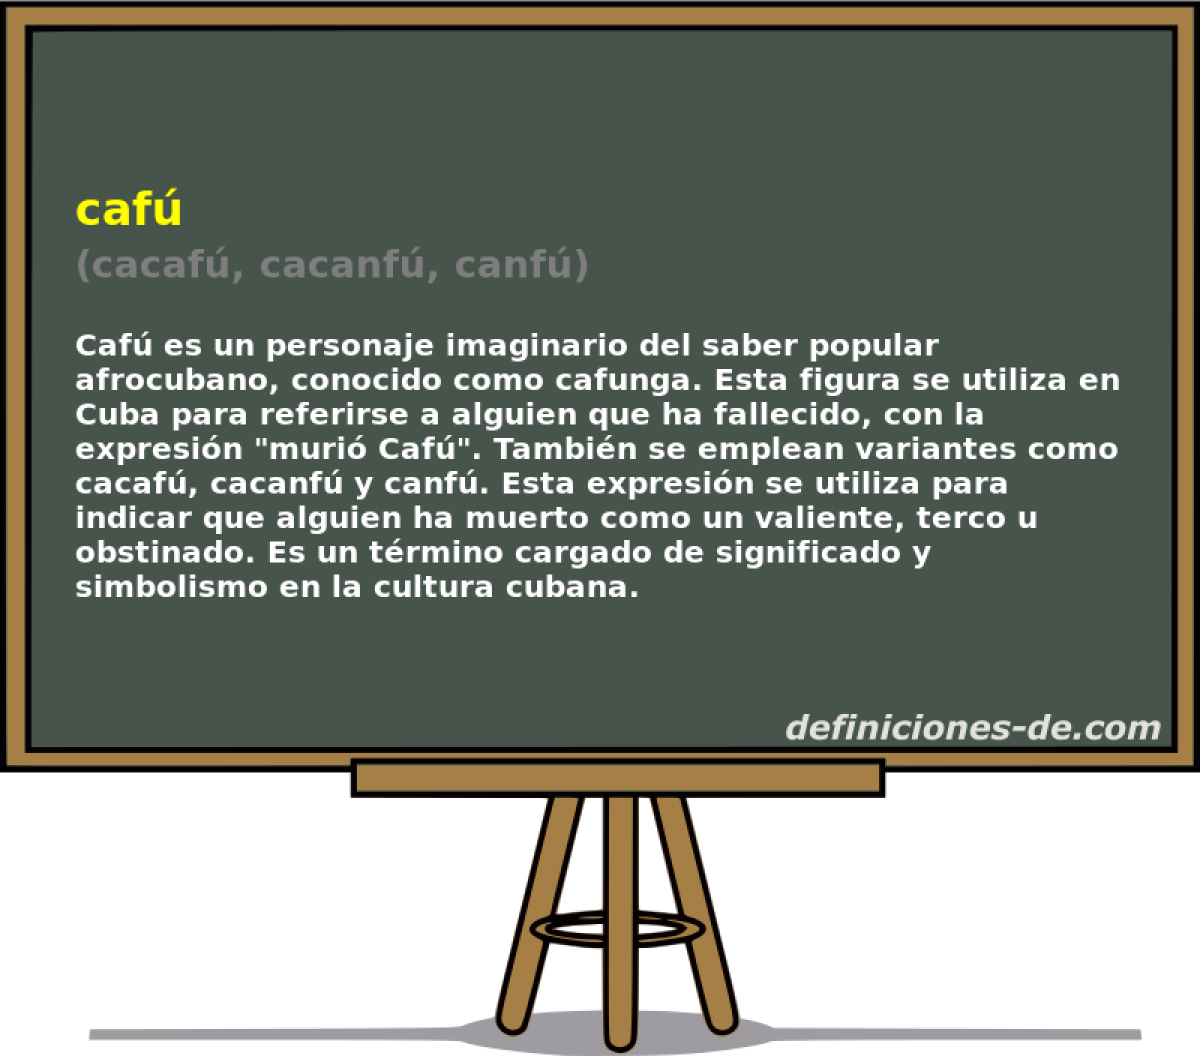 caf (cacaf, cacanf, canf)